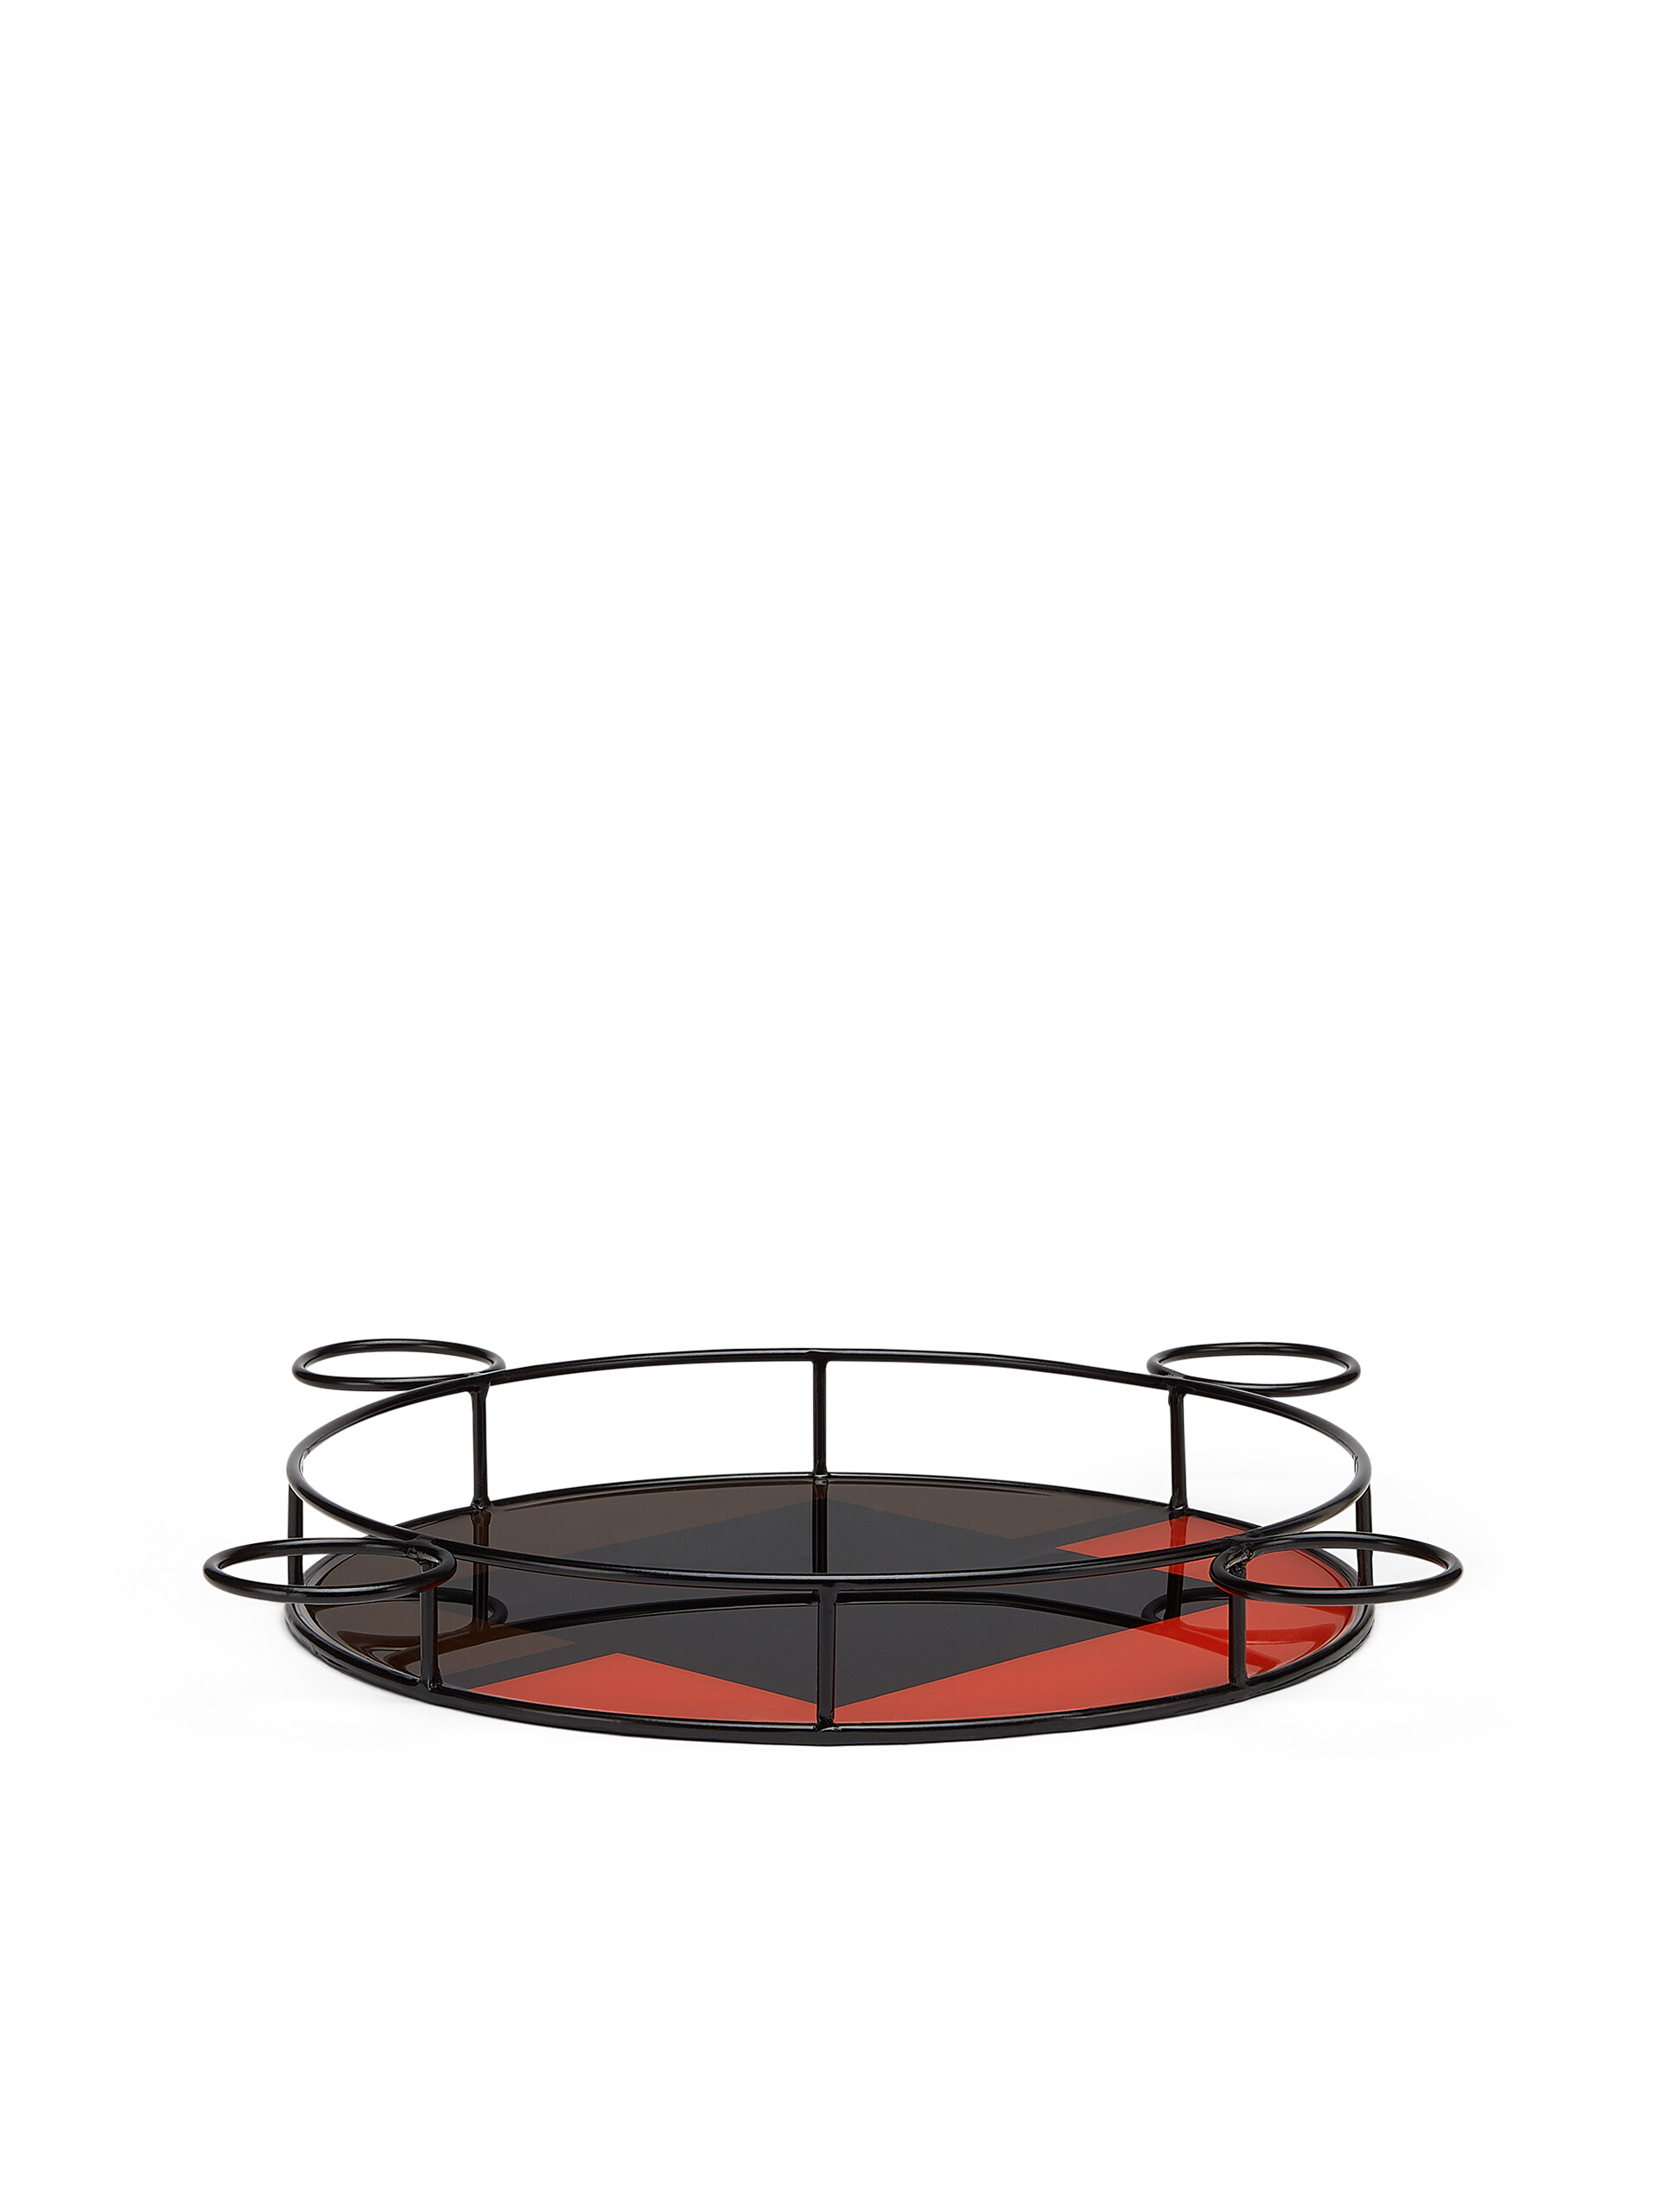 MARNI MARKET round tray in iron and red, brown and black resin - Accessories - Image 2